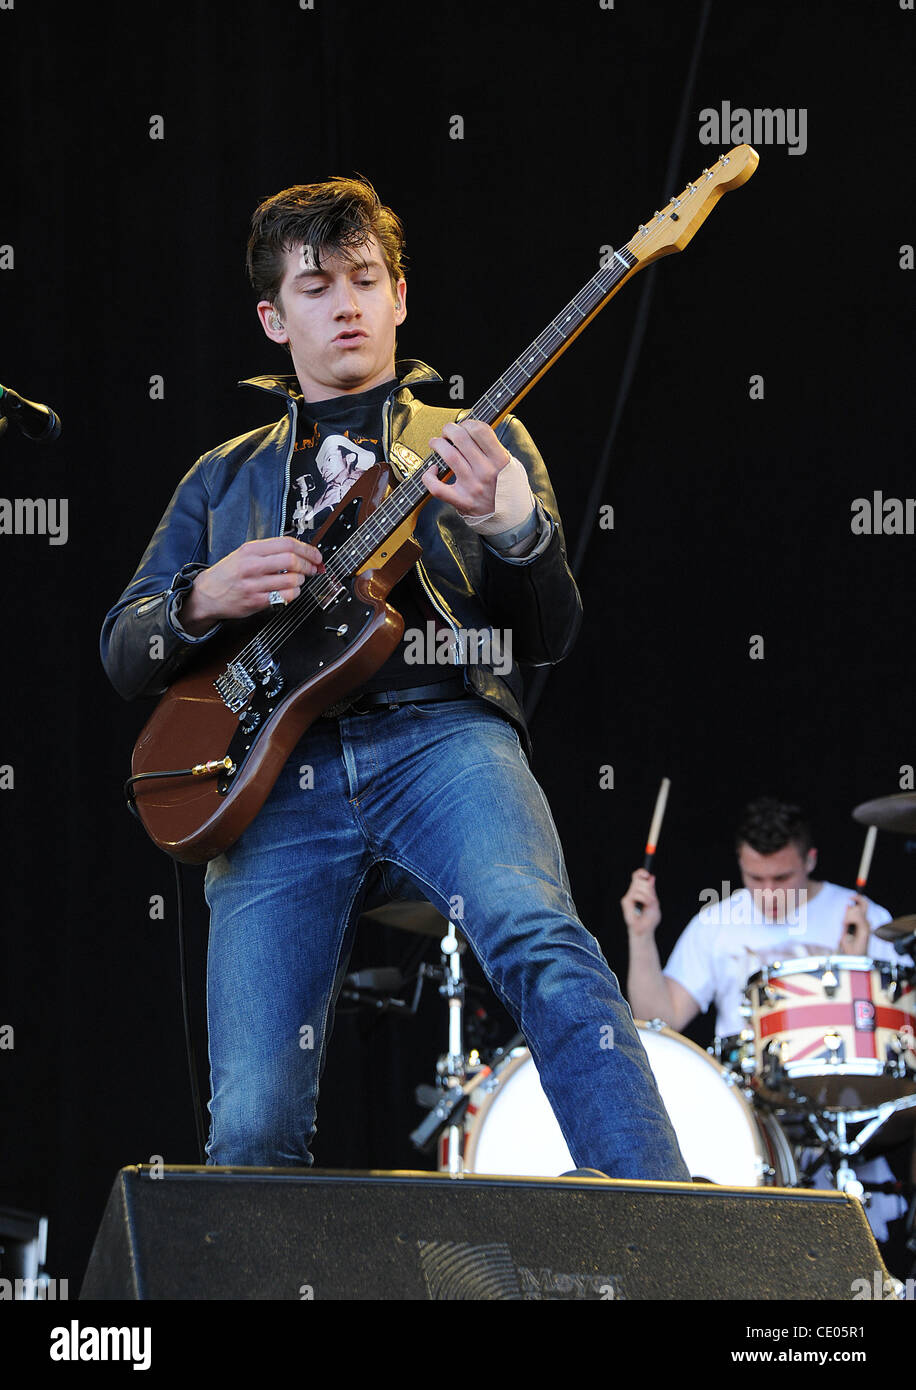 Aug 13, 2011 - San Francisco, California; USA - Singer / Guitarist ALEX  TURNER of the band Arctic Monkeys performs live as part of the 2011 Outside  Lands Music Festival that is